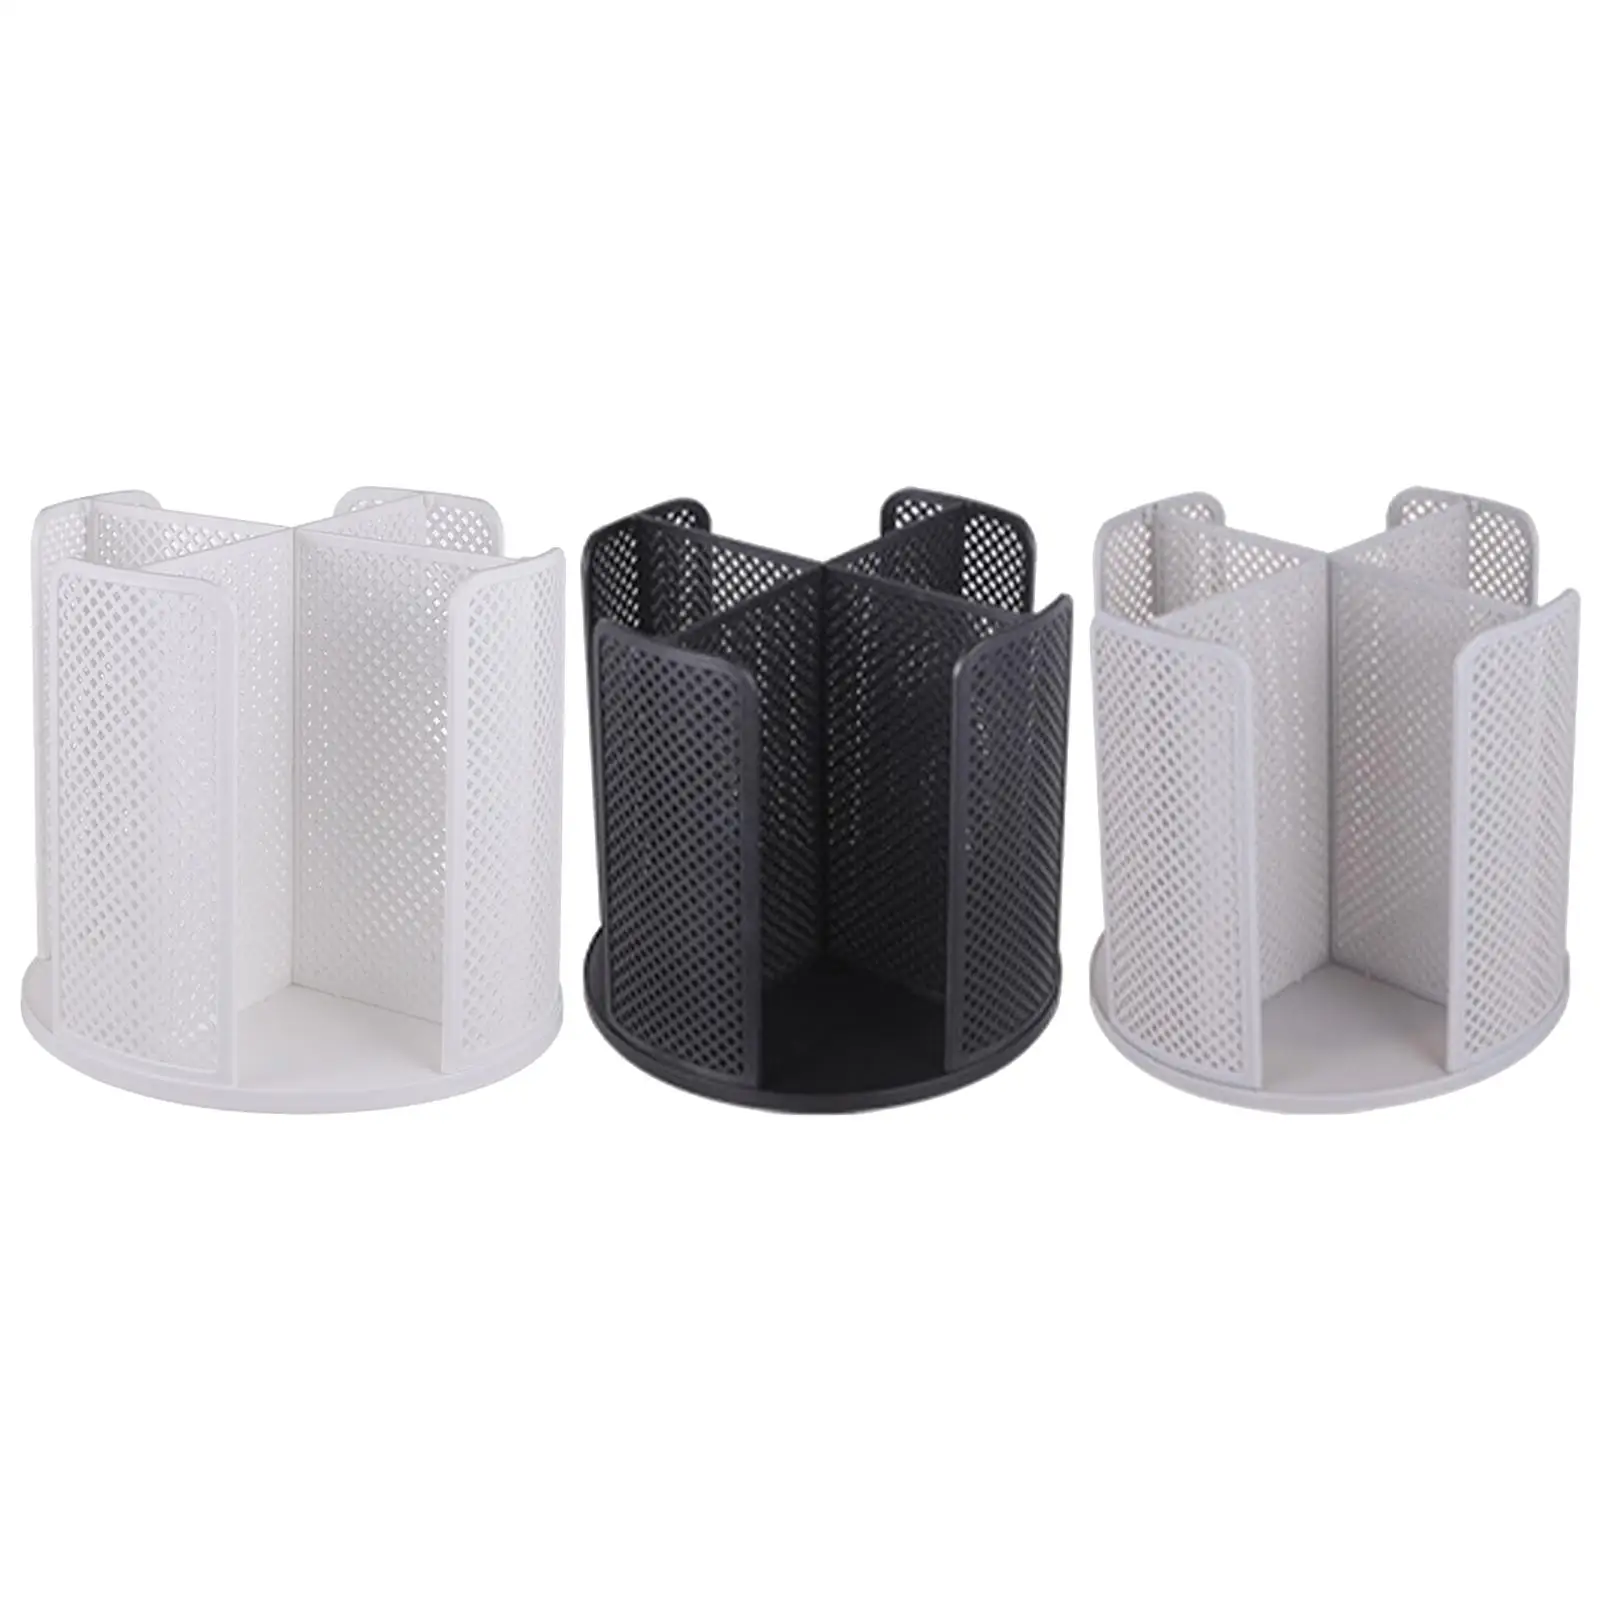 Turntable Disposable Cup and Lid Holder 4 Compartment for 